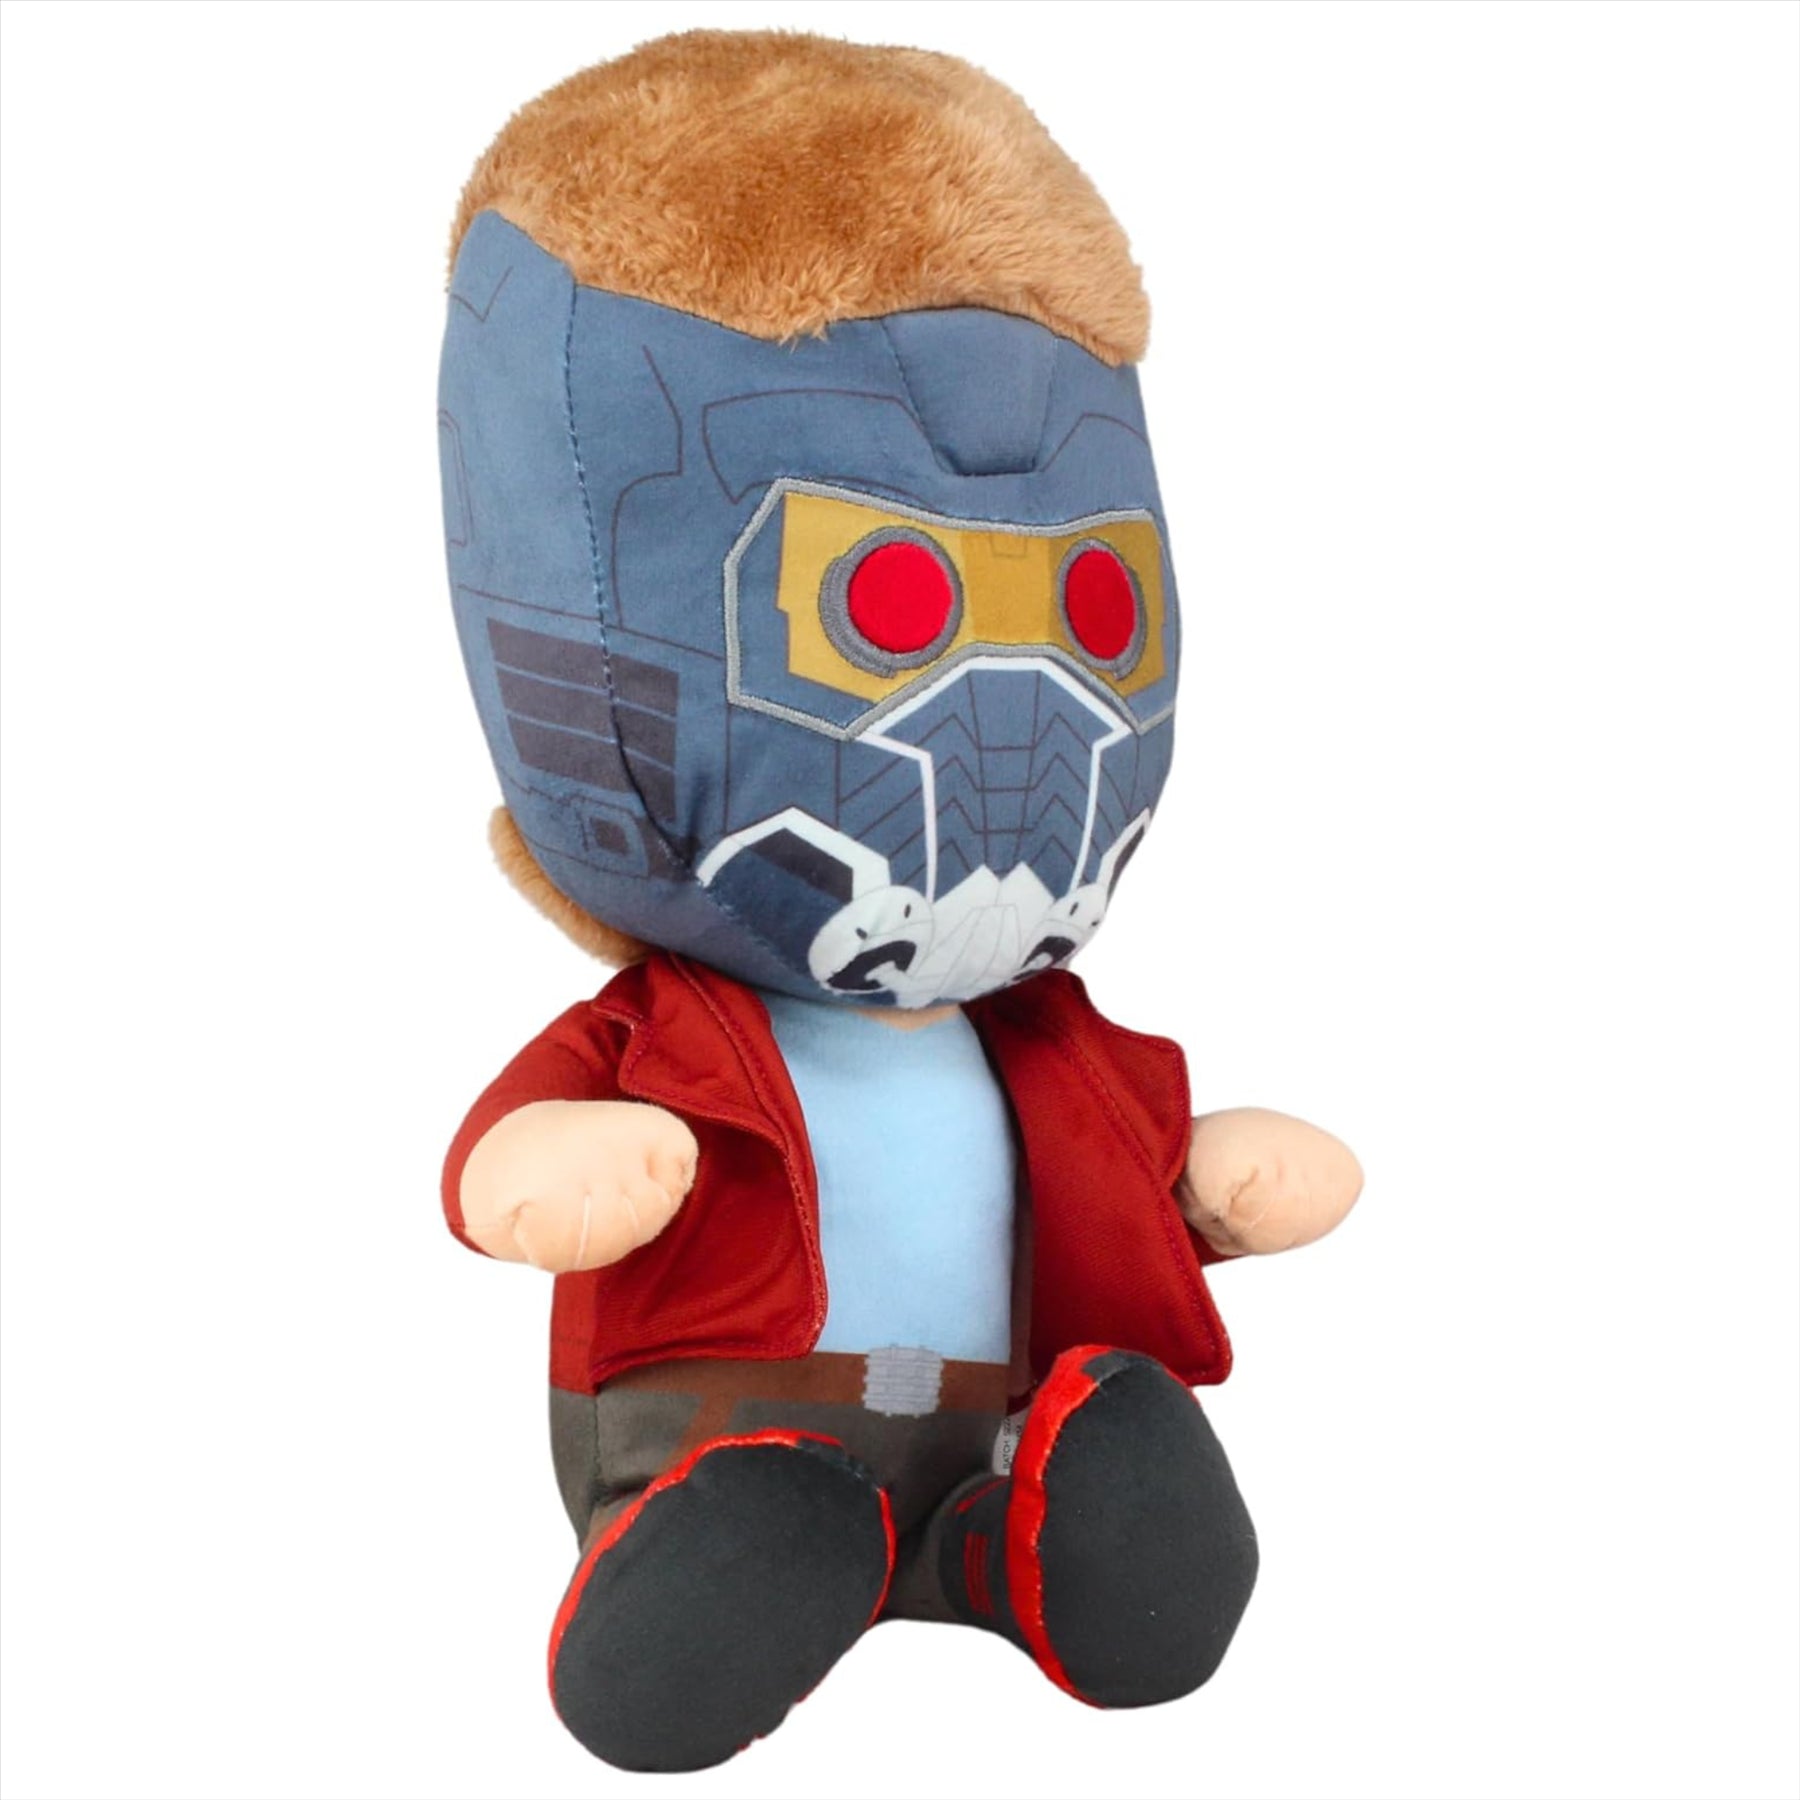 Guardians of the Galaxy Avengers Starlord Super Soft Embroidered 36cm Plush Toy